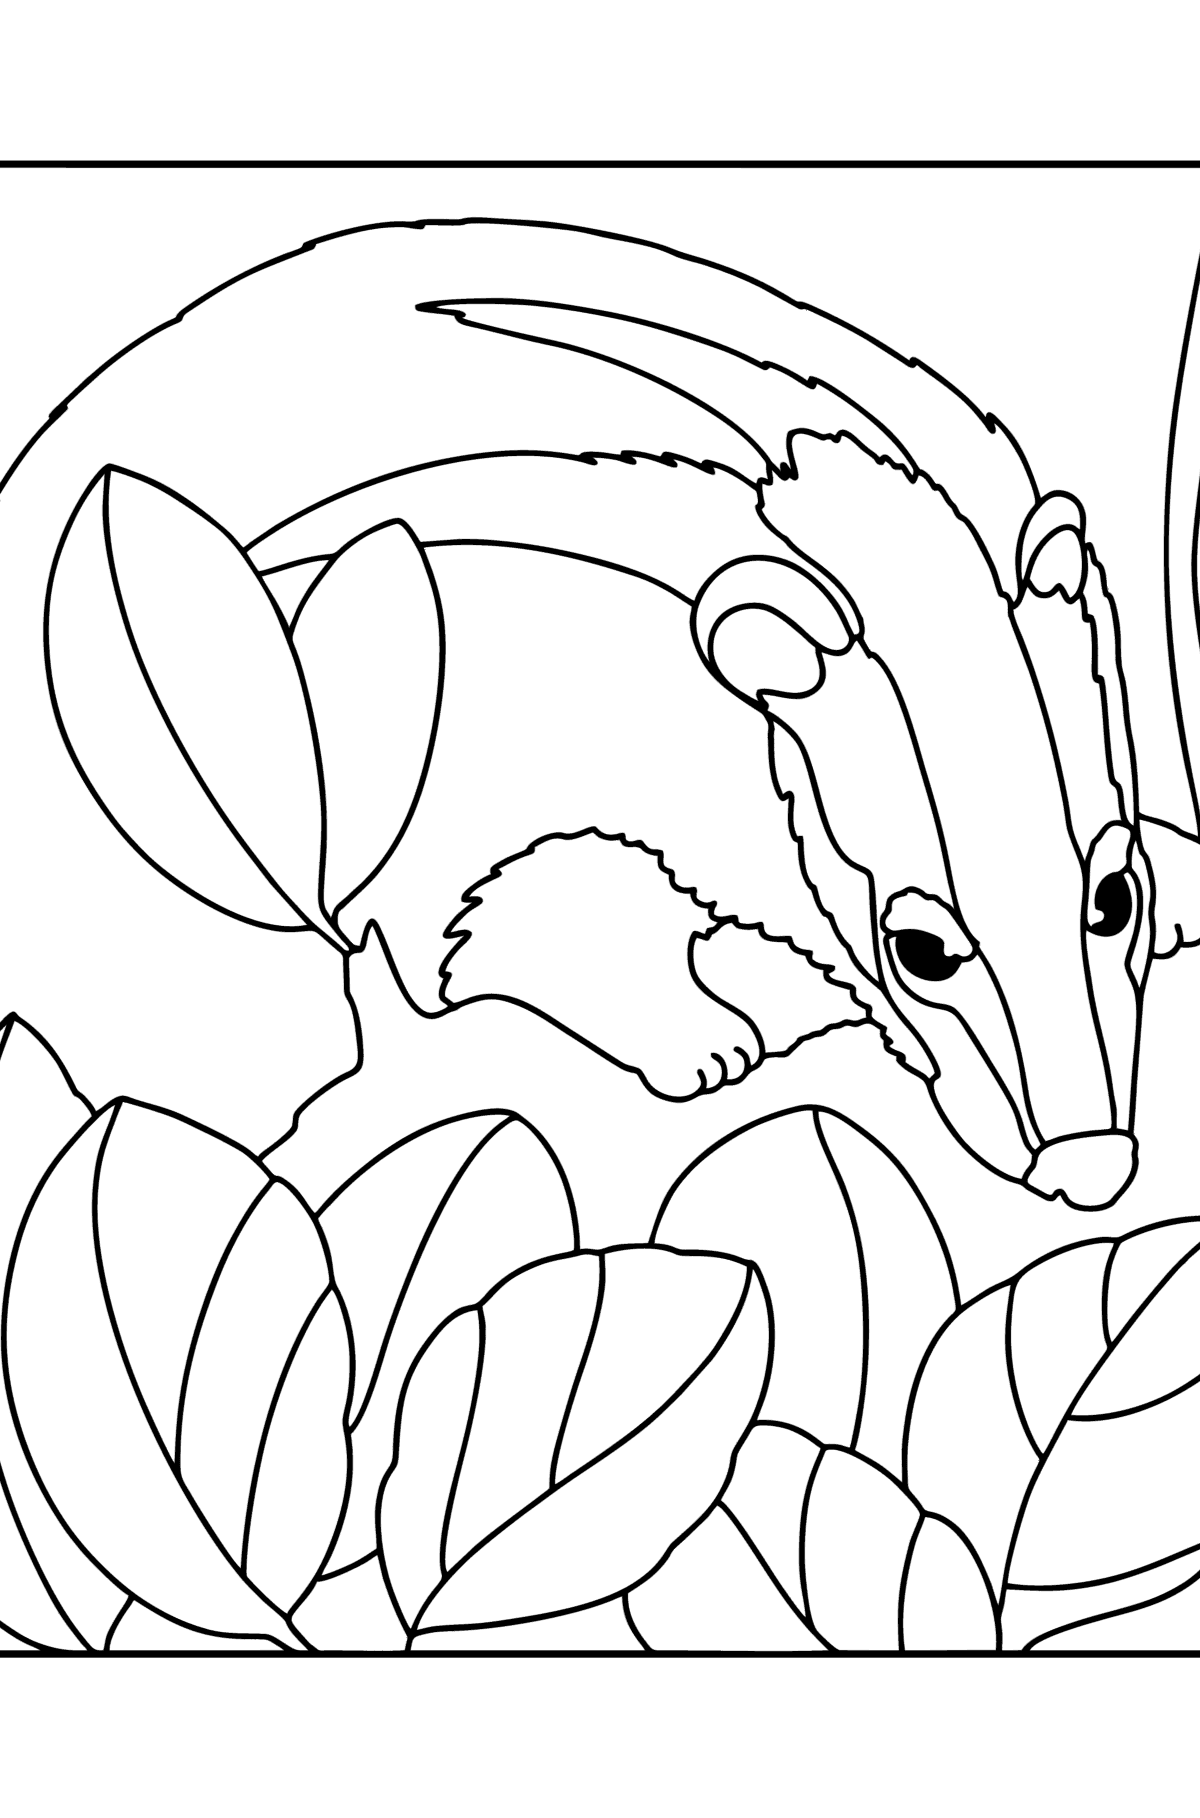 Badger in the forest сoloring page - Coloring Pages for Kids